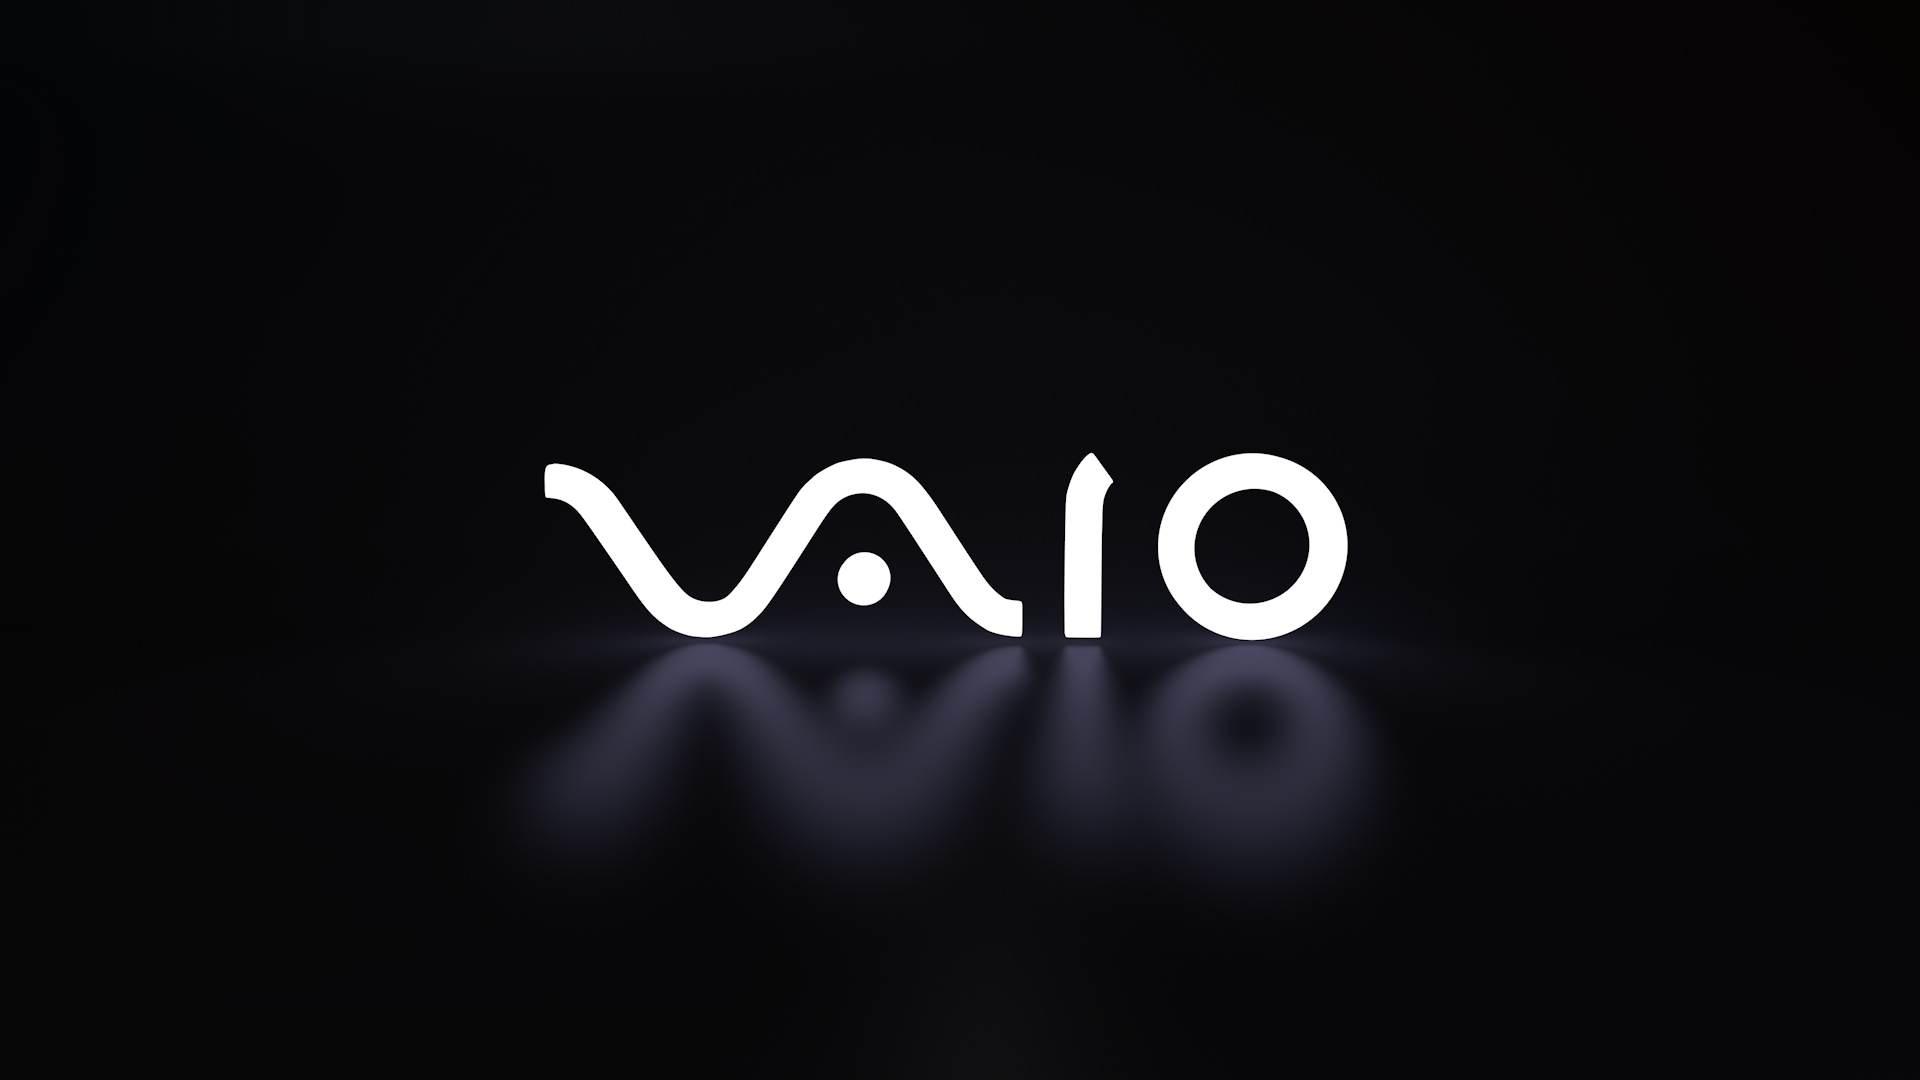 Free Download Hd Sony Vaio Wallpapers Vaio Backgrounds For Download 19x1080 For Your Desktop Mobile Tablet Explore 50 Sony Vaio Wallpaper 1080p Sony Wallpapers 19x1080 Sony Vaio Desktop Wallpaper